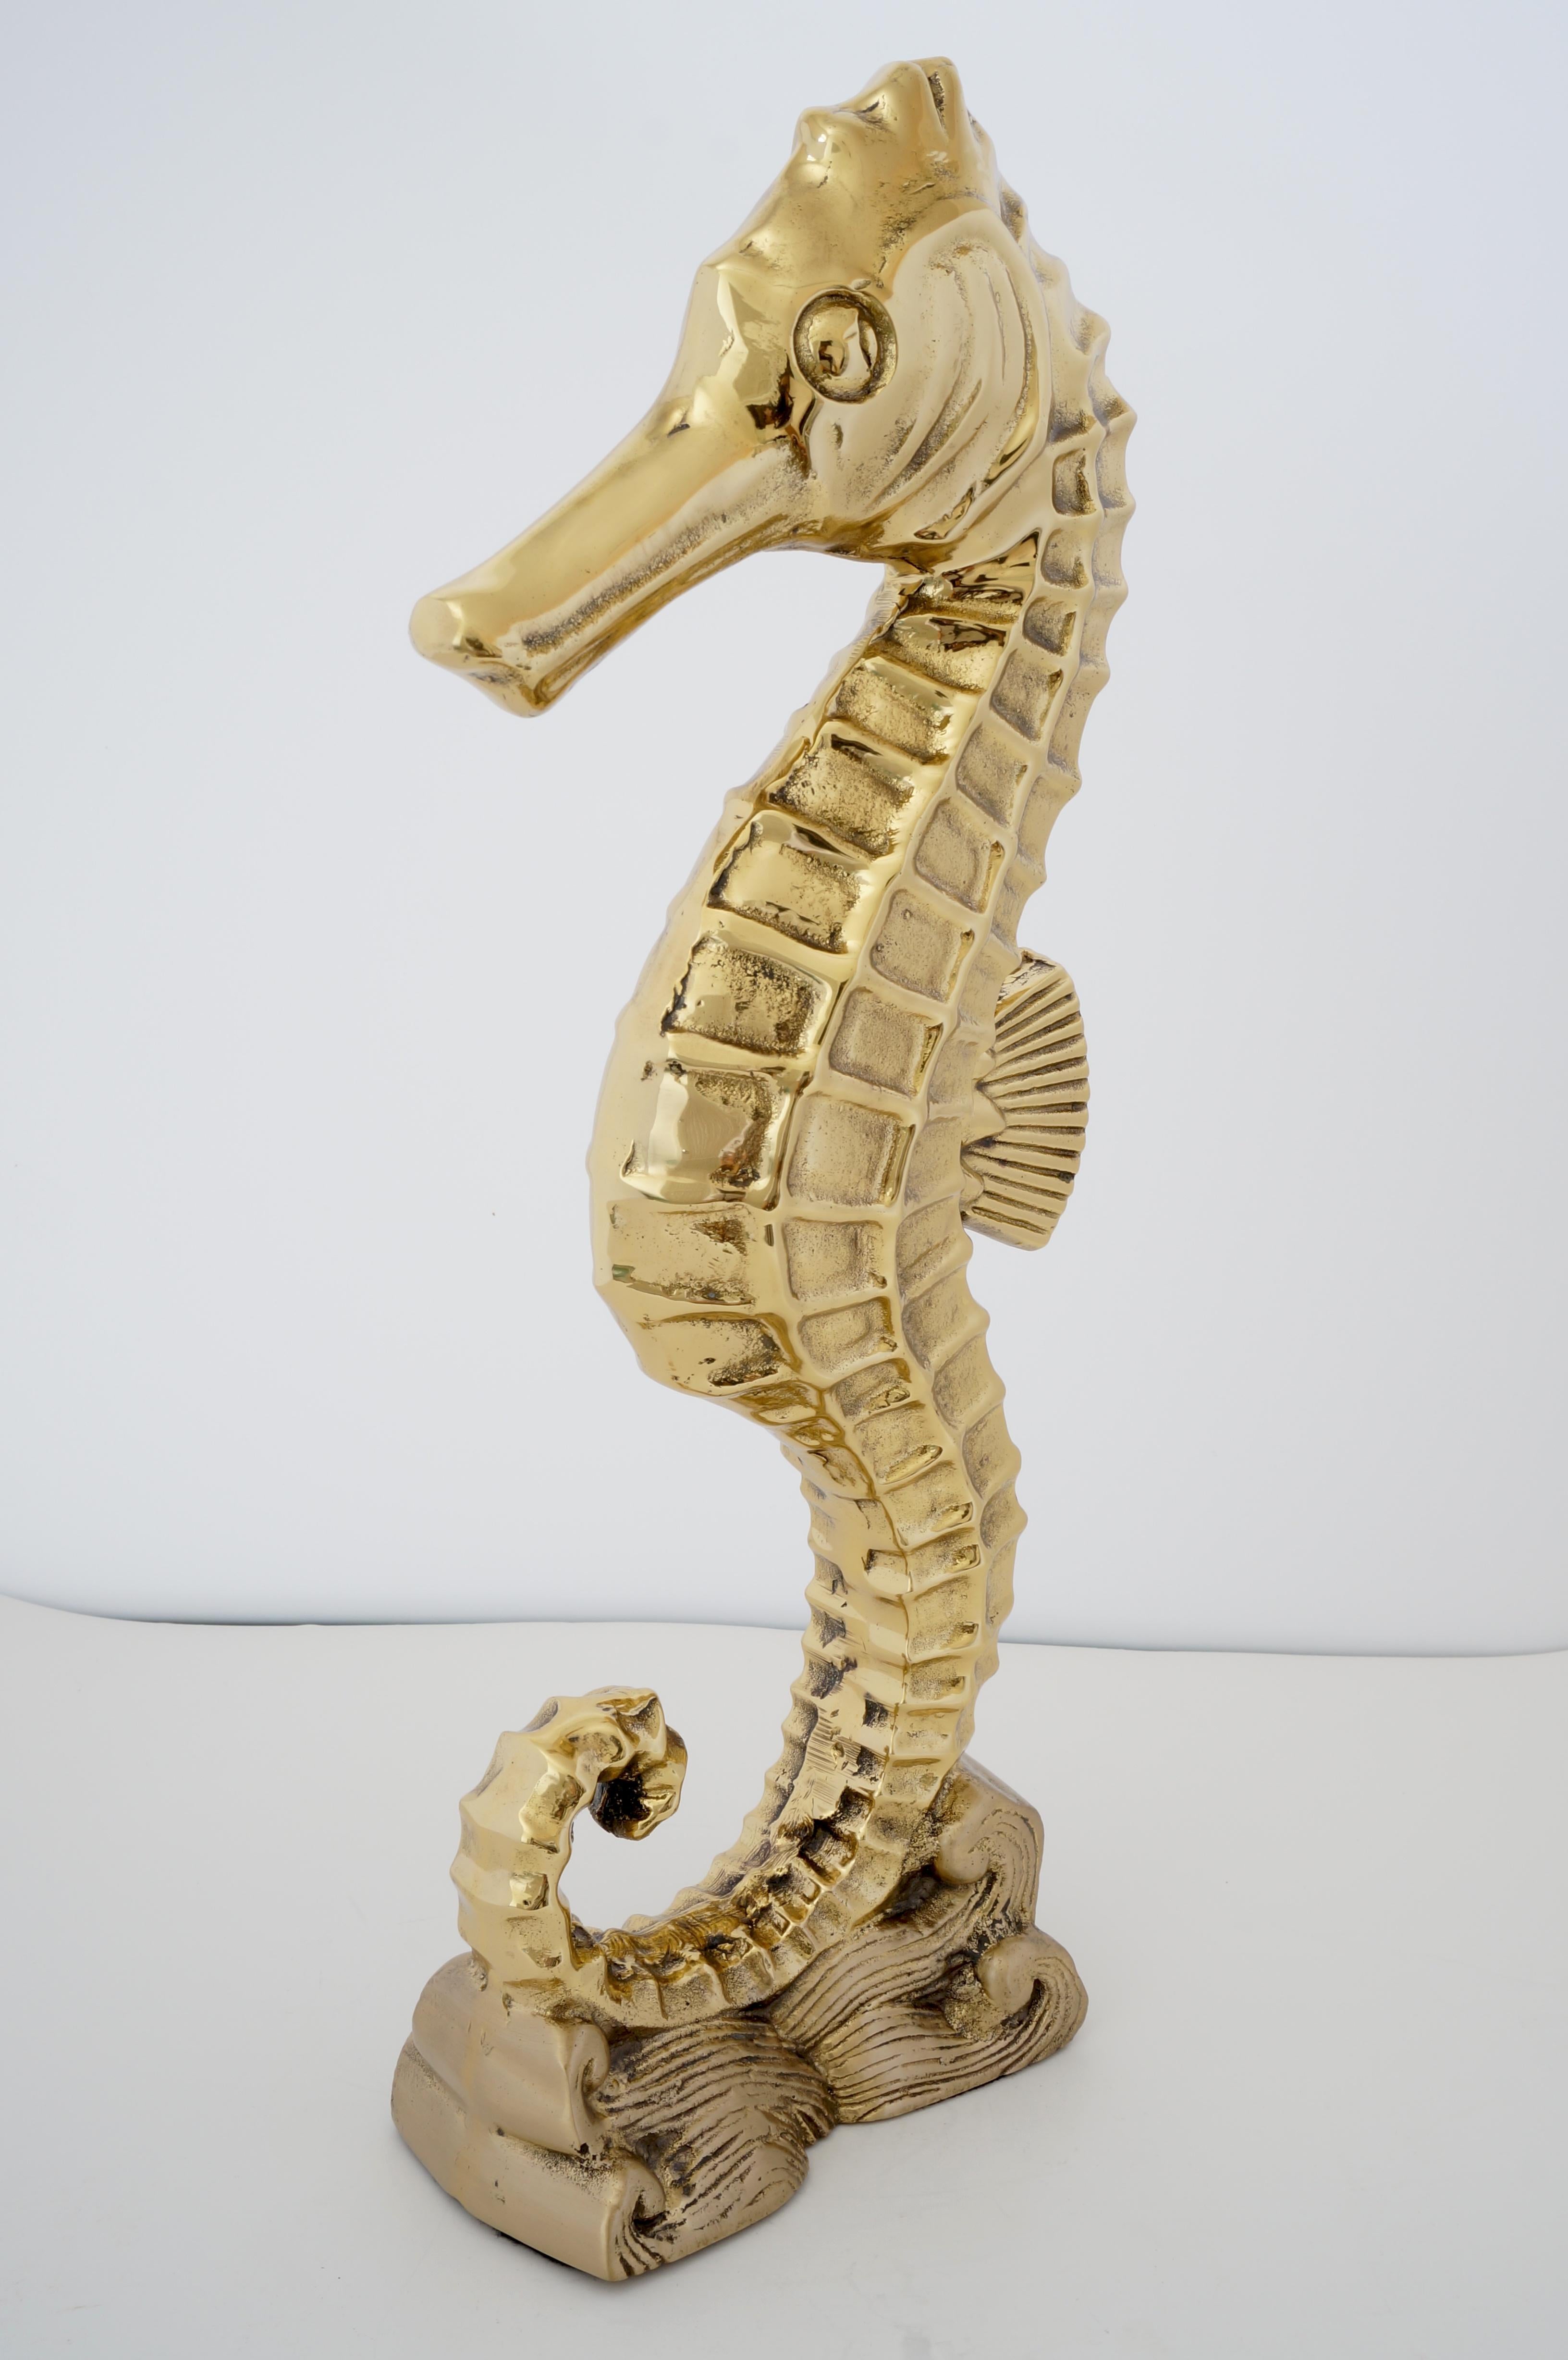 This stylish, chic and charming brass figure of a seahorse could be used as a door stop for your beachside home or as a decorative piece.

Note: The piece has been professionally polished and lacquered (so no tarnishing).

Note: The base (ocean